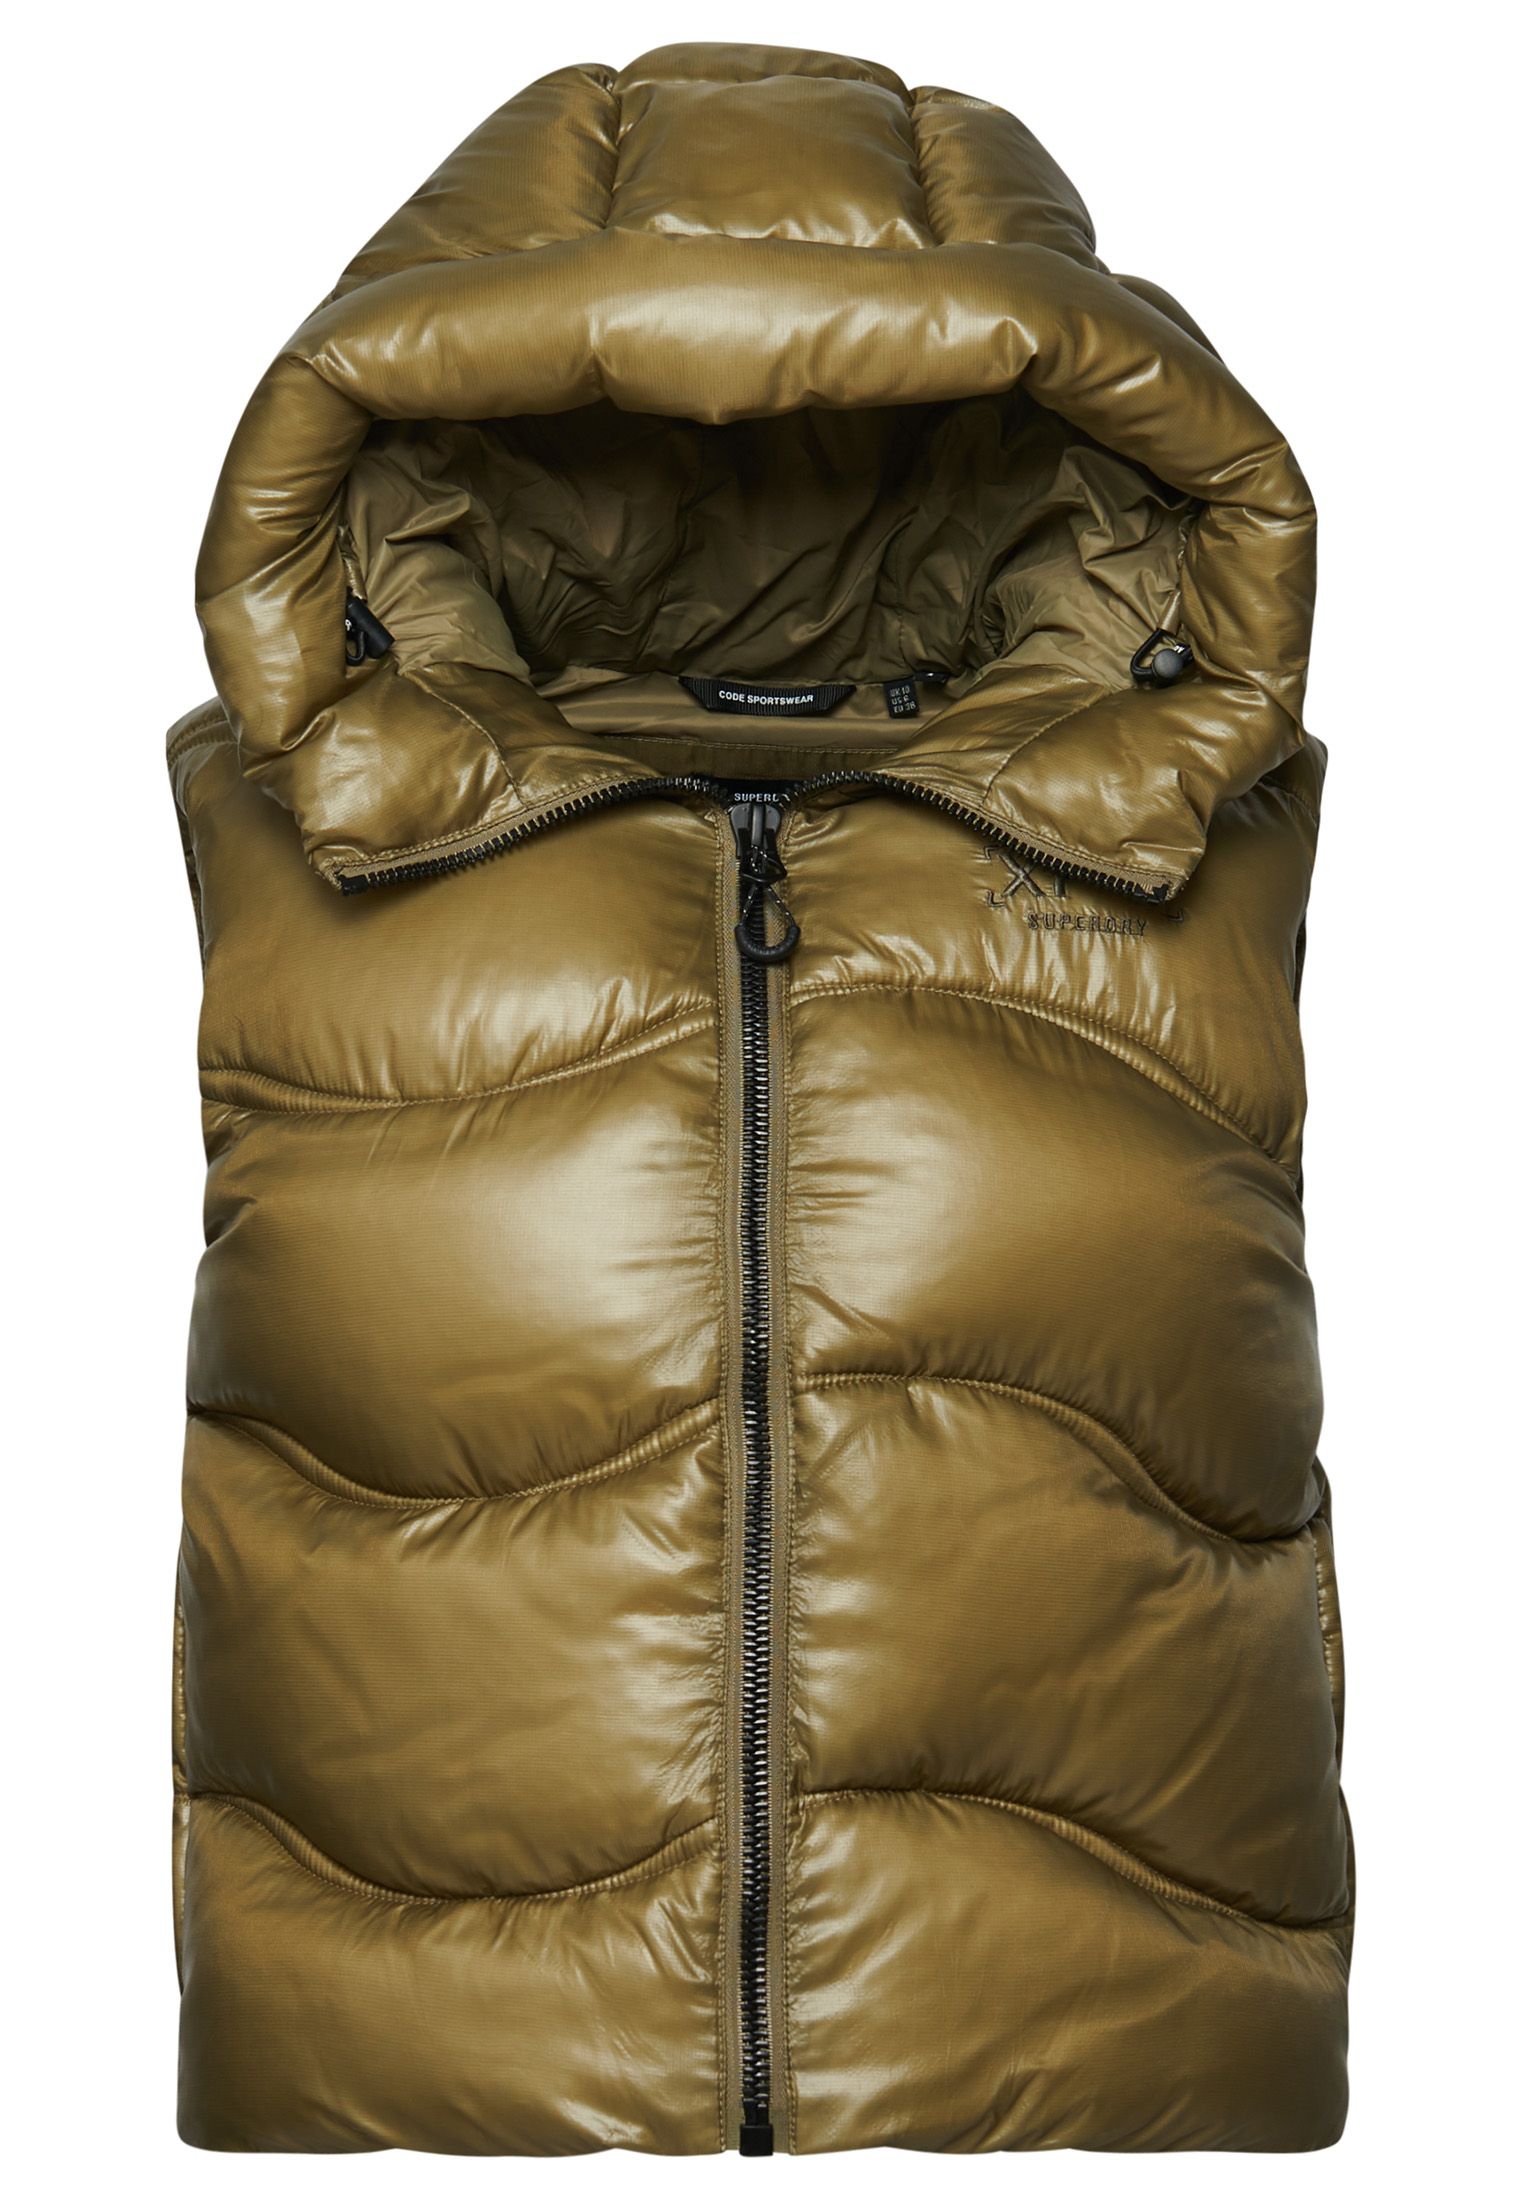 The Shine Quilt padded gilet brings a cropped chic to your layering options, helping you stay warm with a luxurious combination of soft lining and quilted padding. Thanks to its classic gilet design, it allows you to stay sporty and mobile with maximum ease of movement and its lightweight design, making it an excellent choice as a go-to layer for a combination of both function and cosy style.Padded designHood with drawcord adjustmentZip fasteningEmbroidered detailing on chestTwo zip-fastened side pocketsBungee cord adjustable hemFully linedThe padding in this jacket is 100% recycled, each jacket contains up to 20 recycled bottles, this avoids these bottles being sent to landfill or polluting our oceans.